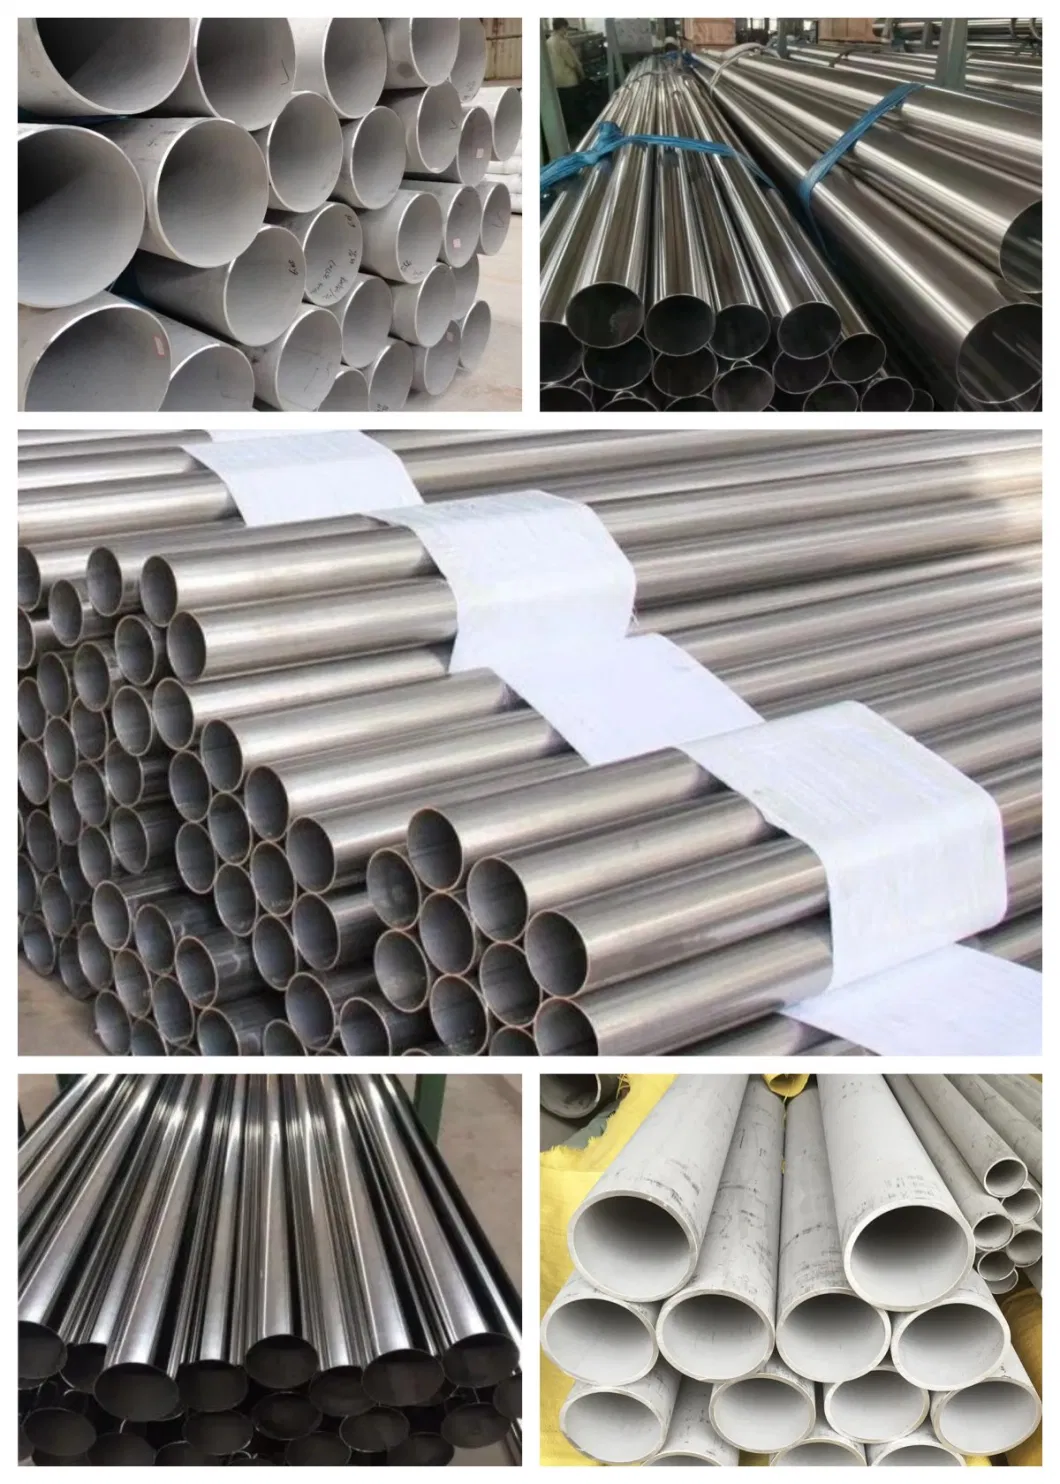 316 Ss Capillary Tubing Suppliers in Pipe, Round Capillary Stainless Steel Pipe Exporters